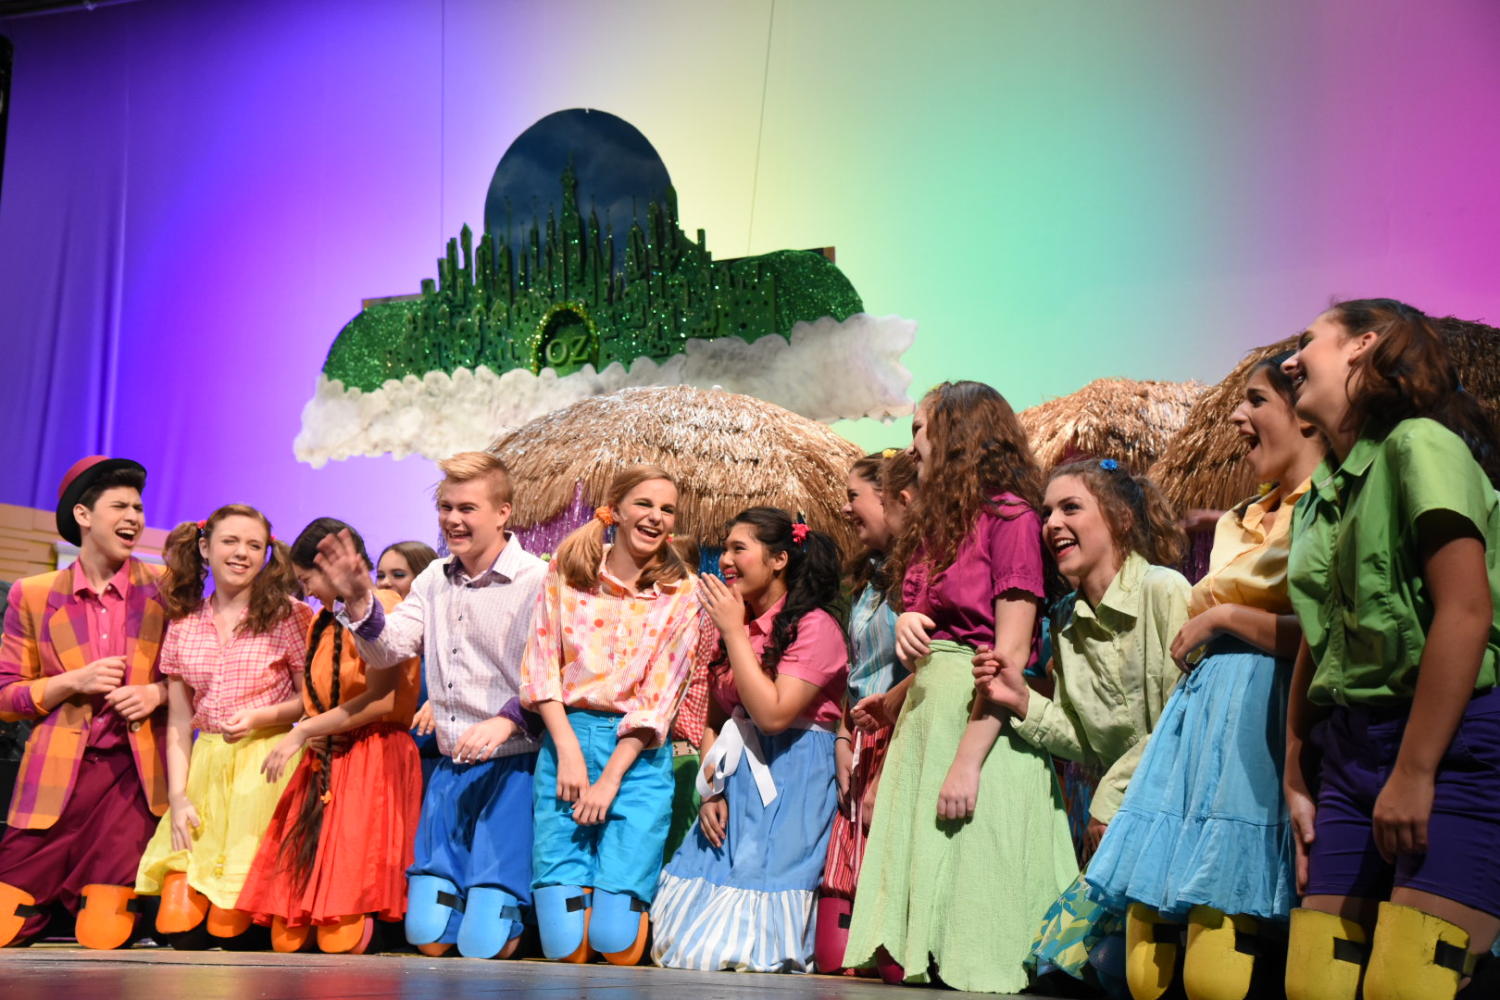 “The Wonderful Wizard of Oz” makes you feel like you’re not in Naperville anymore